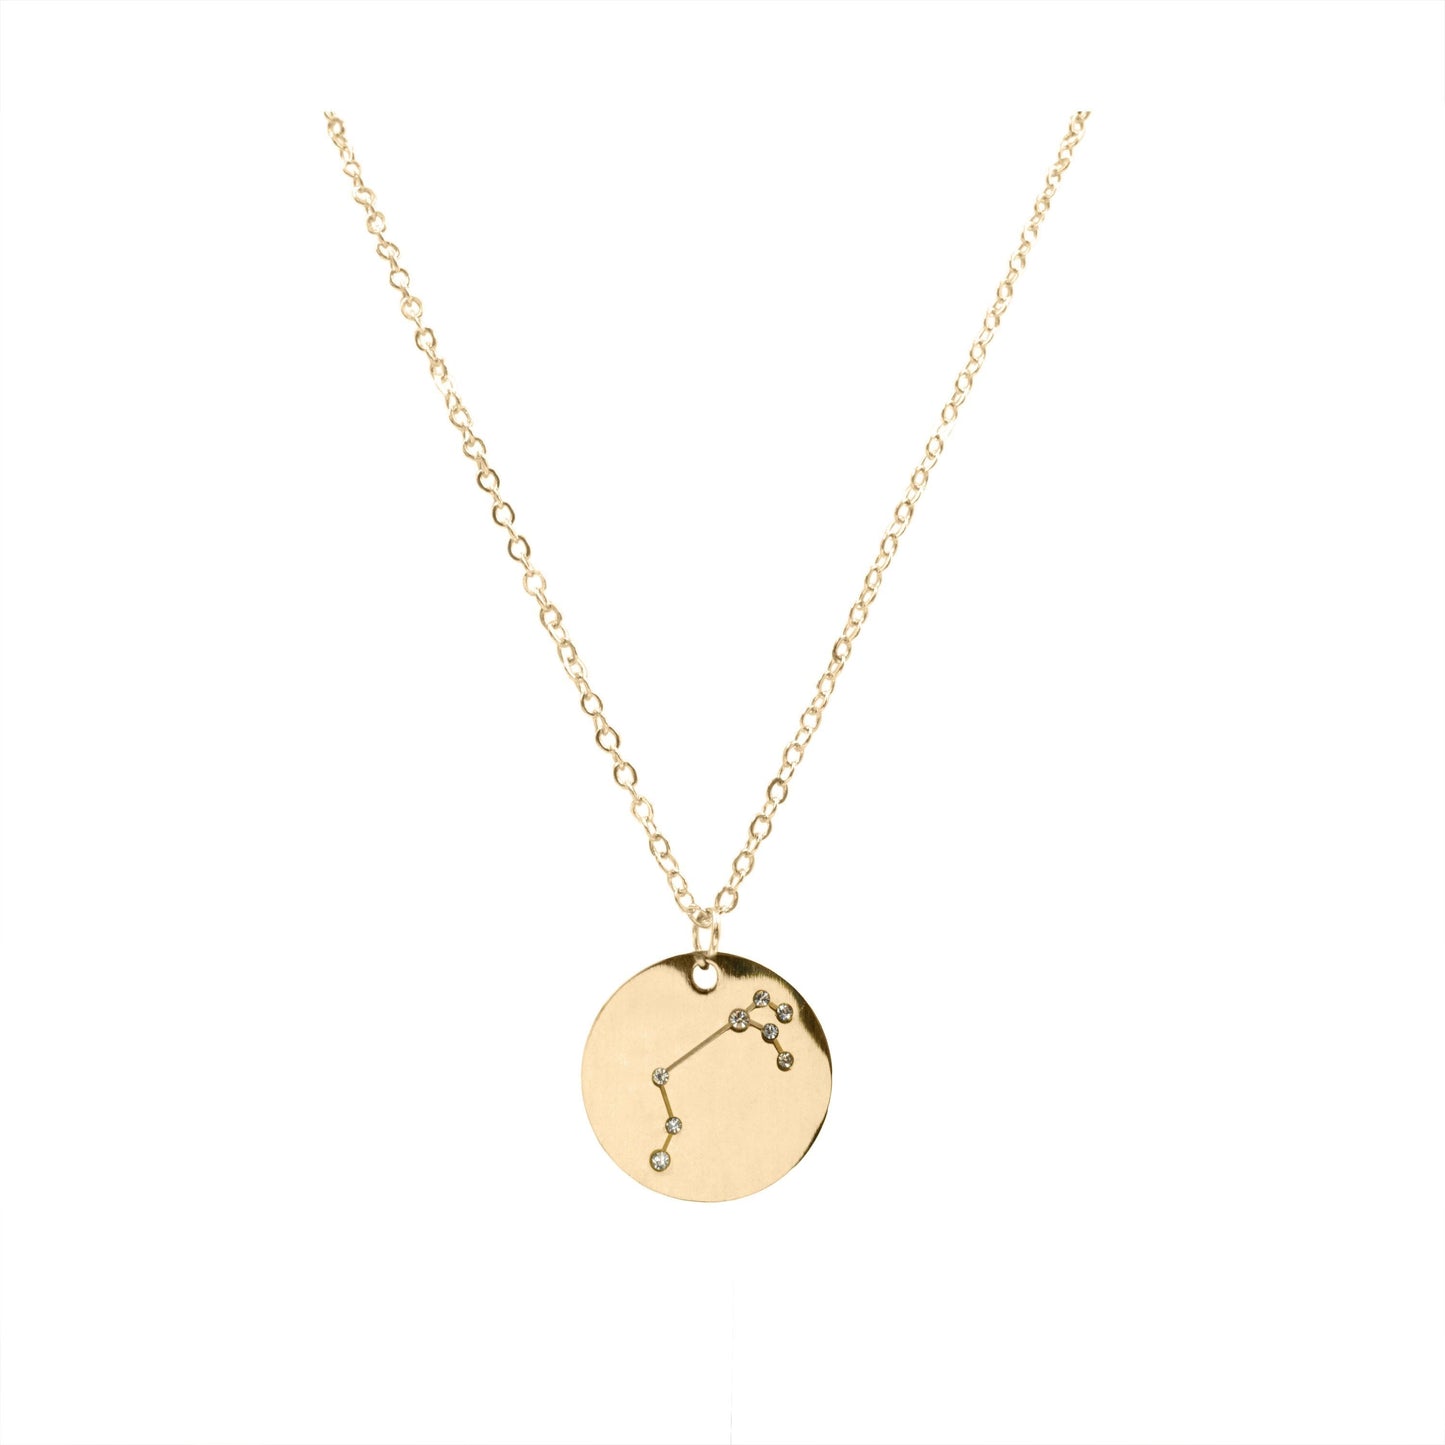 Zodiac Collection - Aries Necklace  (Mar 21 - Apr 19)